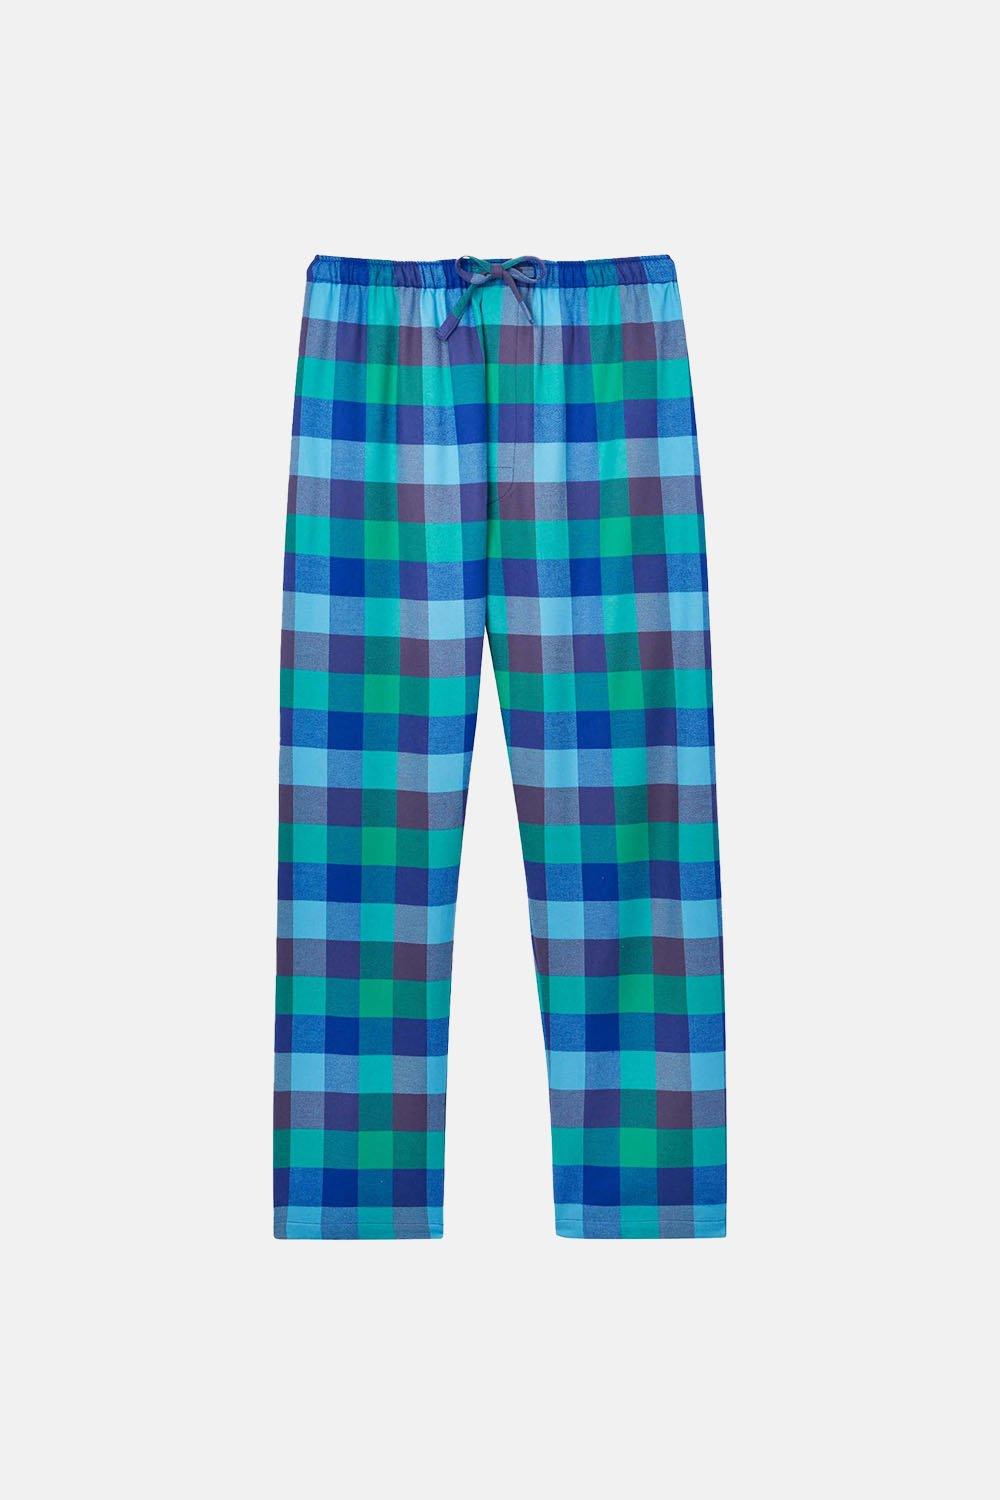 'Shire Square' Blue Check Brushed Cotton Pyjama Trousers